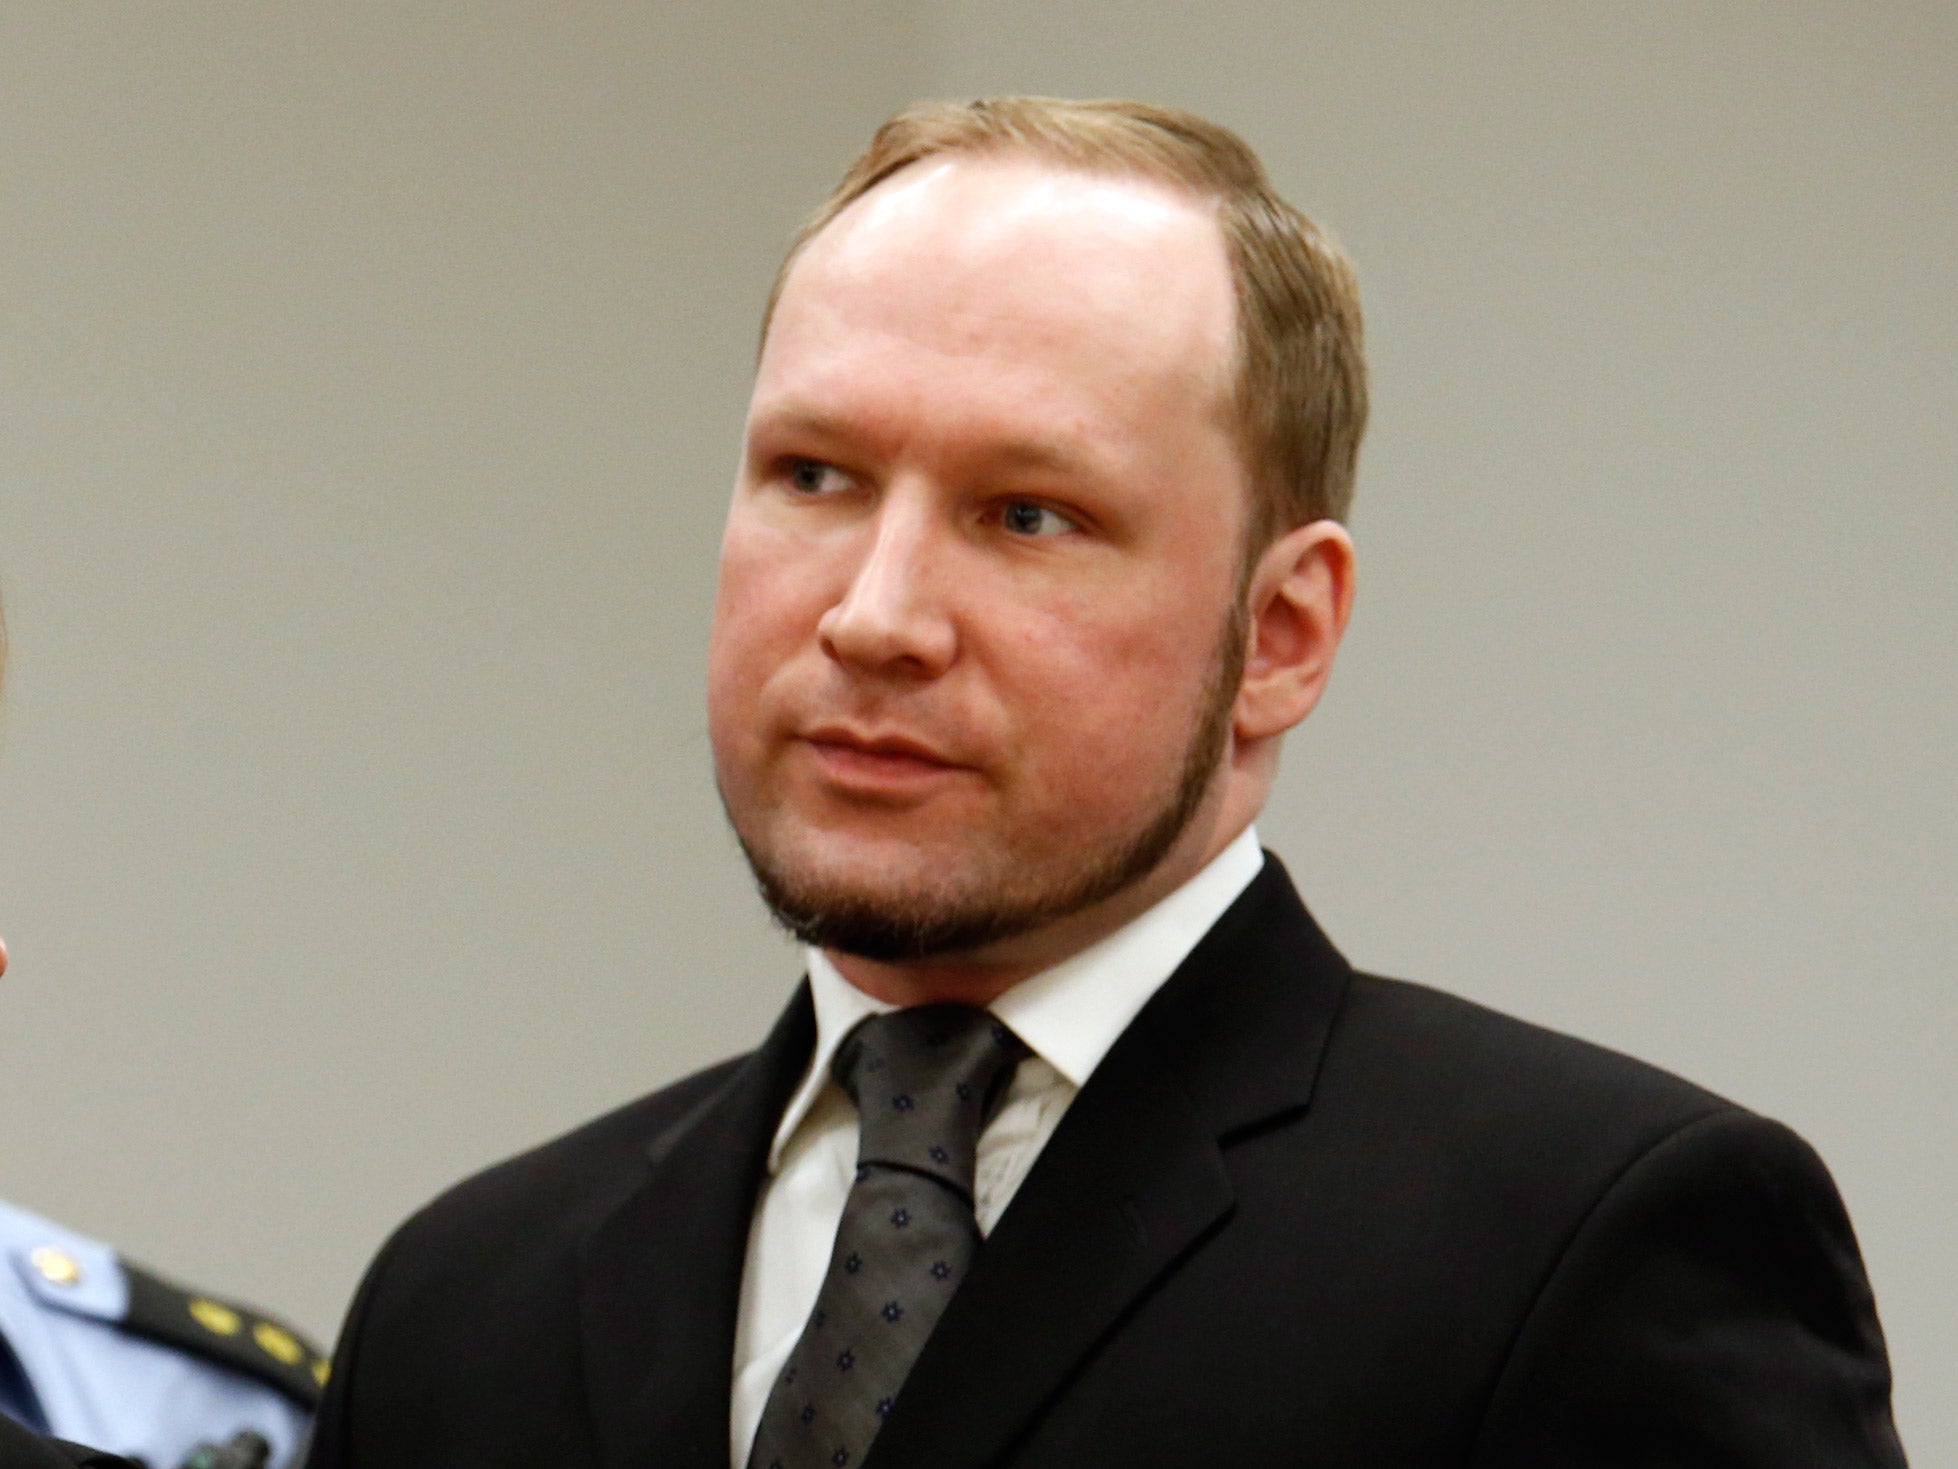 Breivik is serving a 21 year sentence after killed 77 people in two attacks in 2011